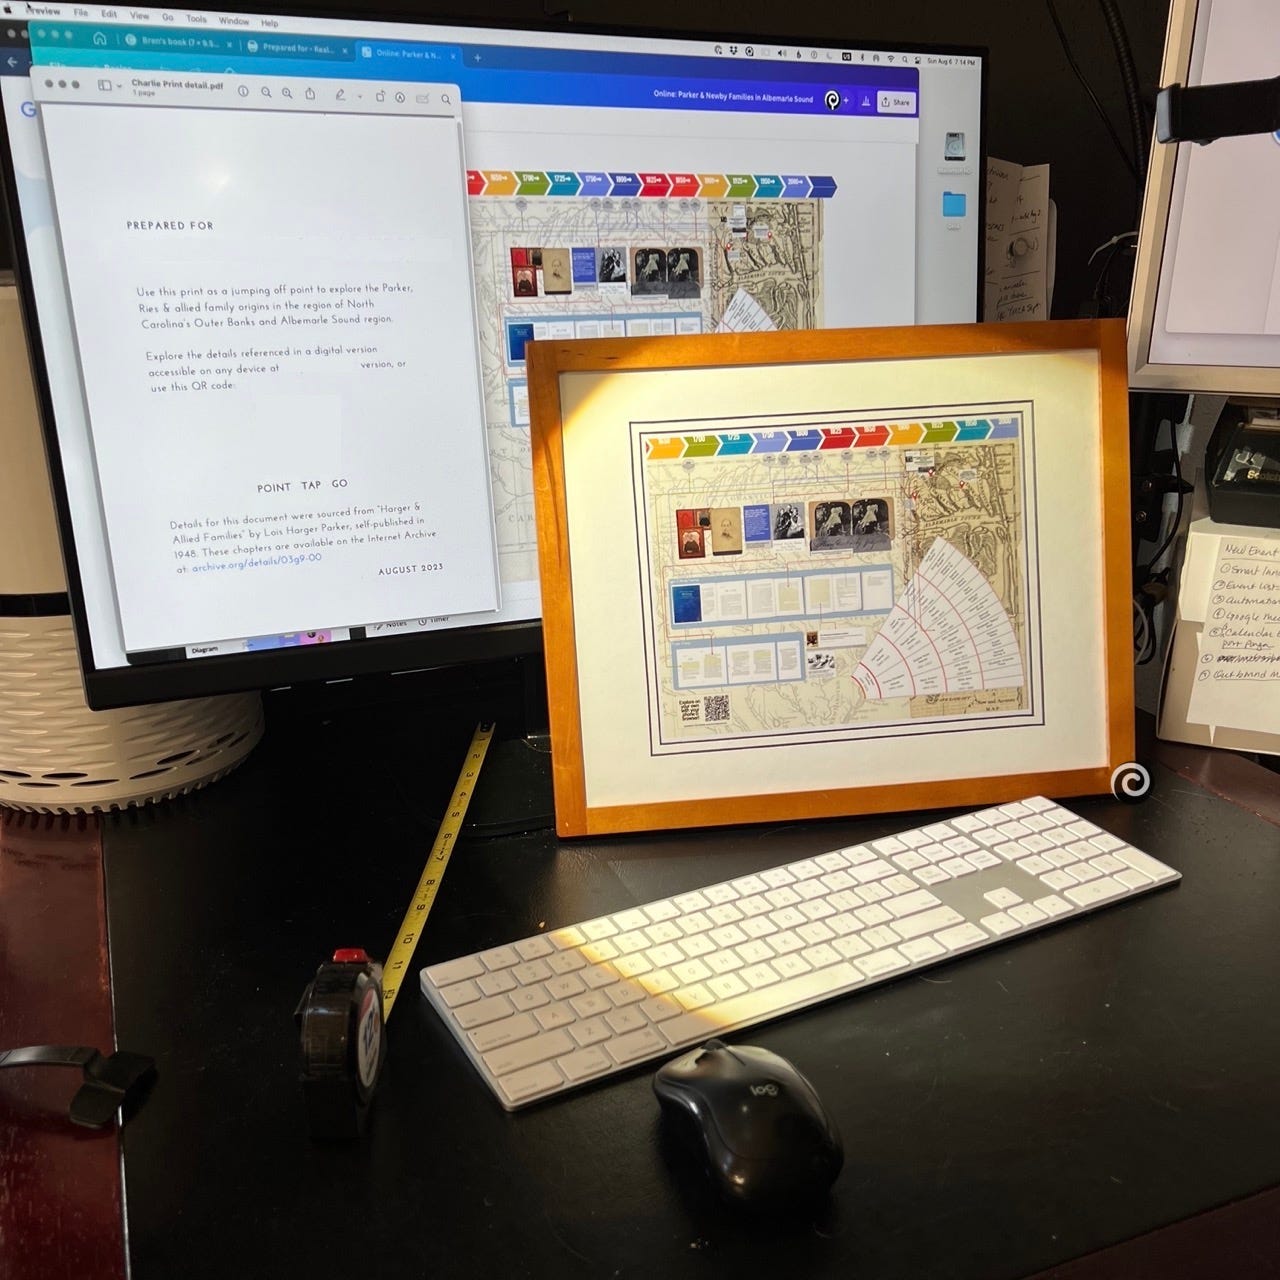 From "A Map, Timeline & Story Viewed: Two Ways" project showing the framed artwork with a digital version behind it on a computer screen.